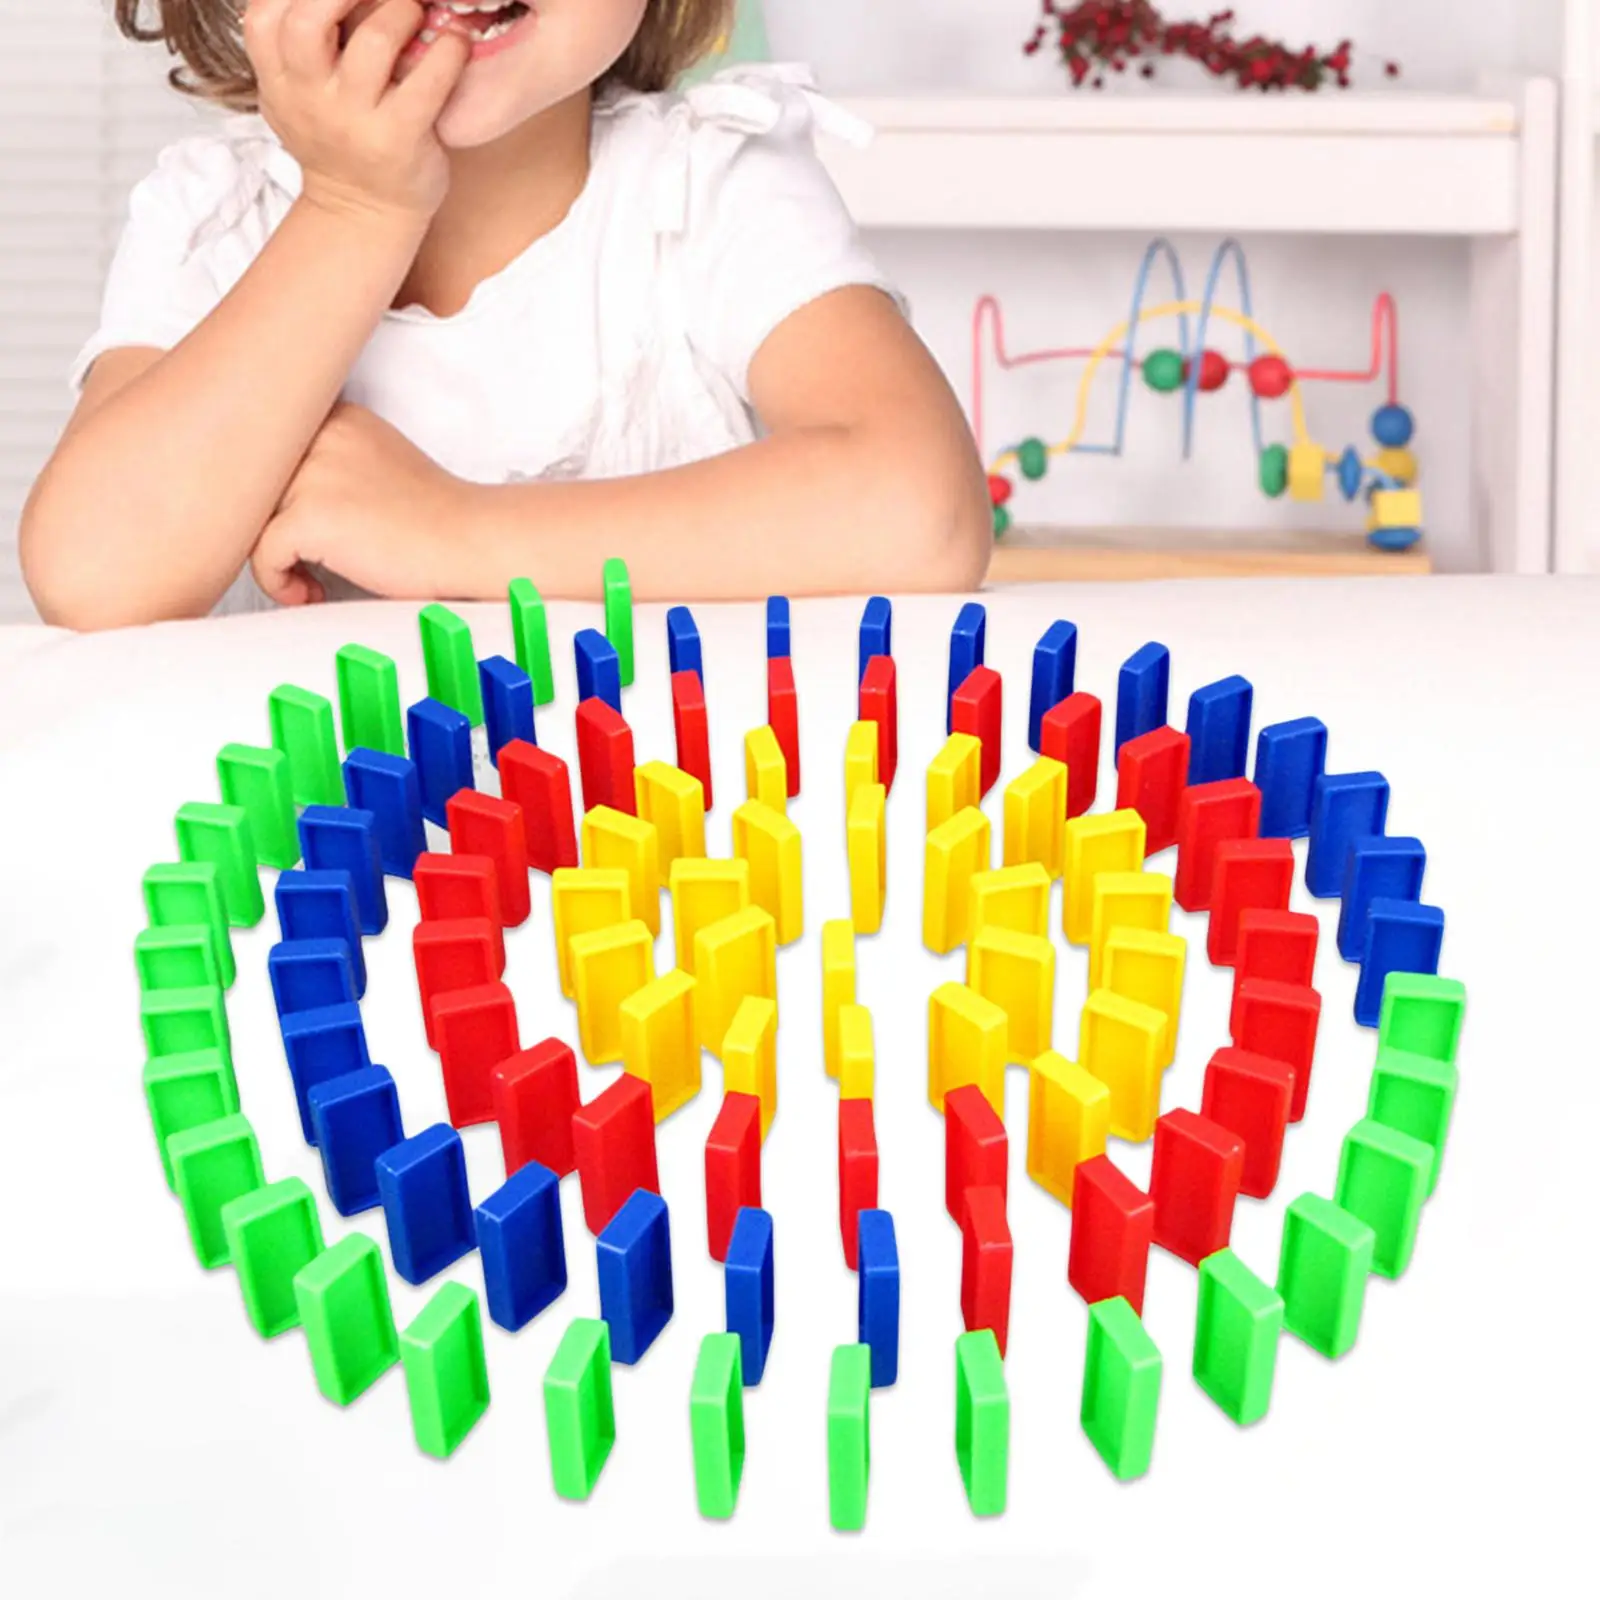 100 Pieces Dominoes Train Blocks Set Building Stacking Toy Educational Play Toy for Toddler Girls Boys Children Creative Gifts